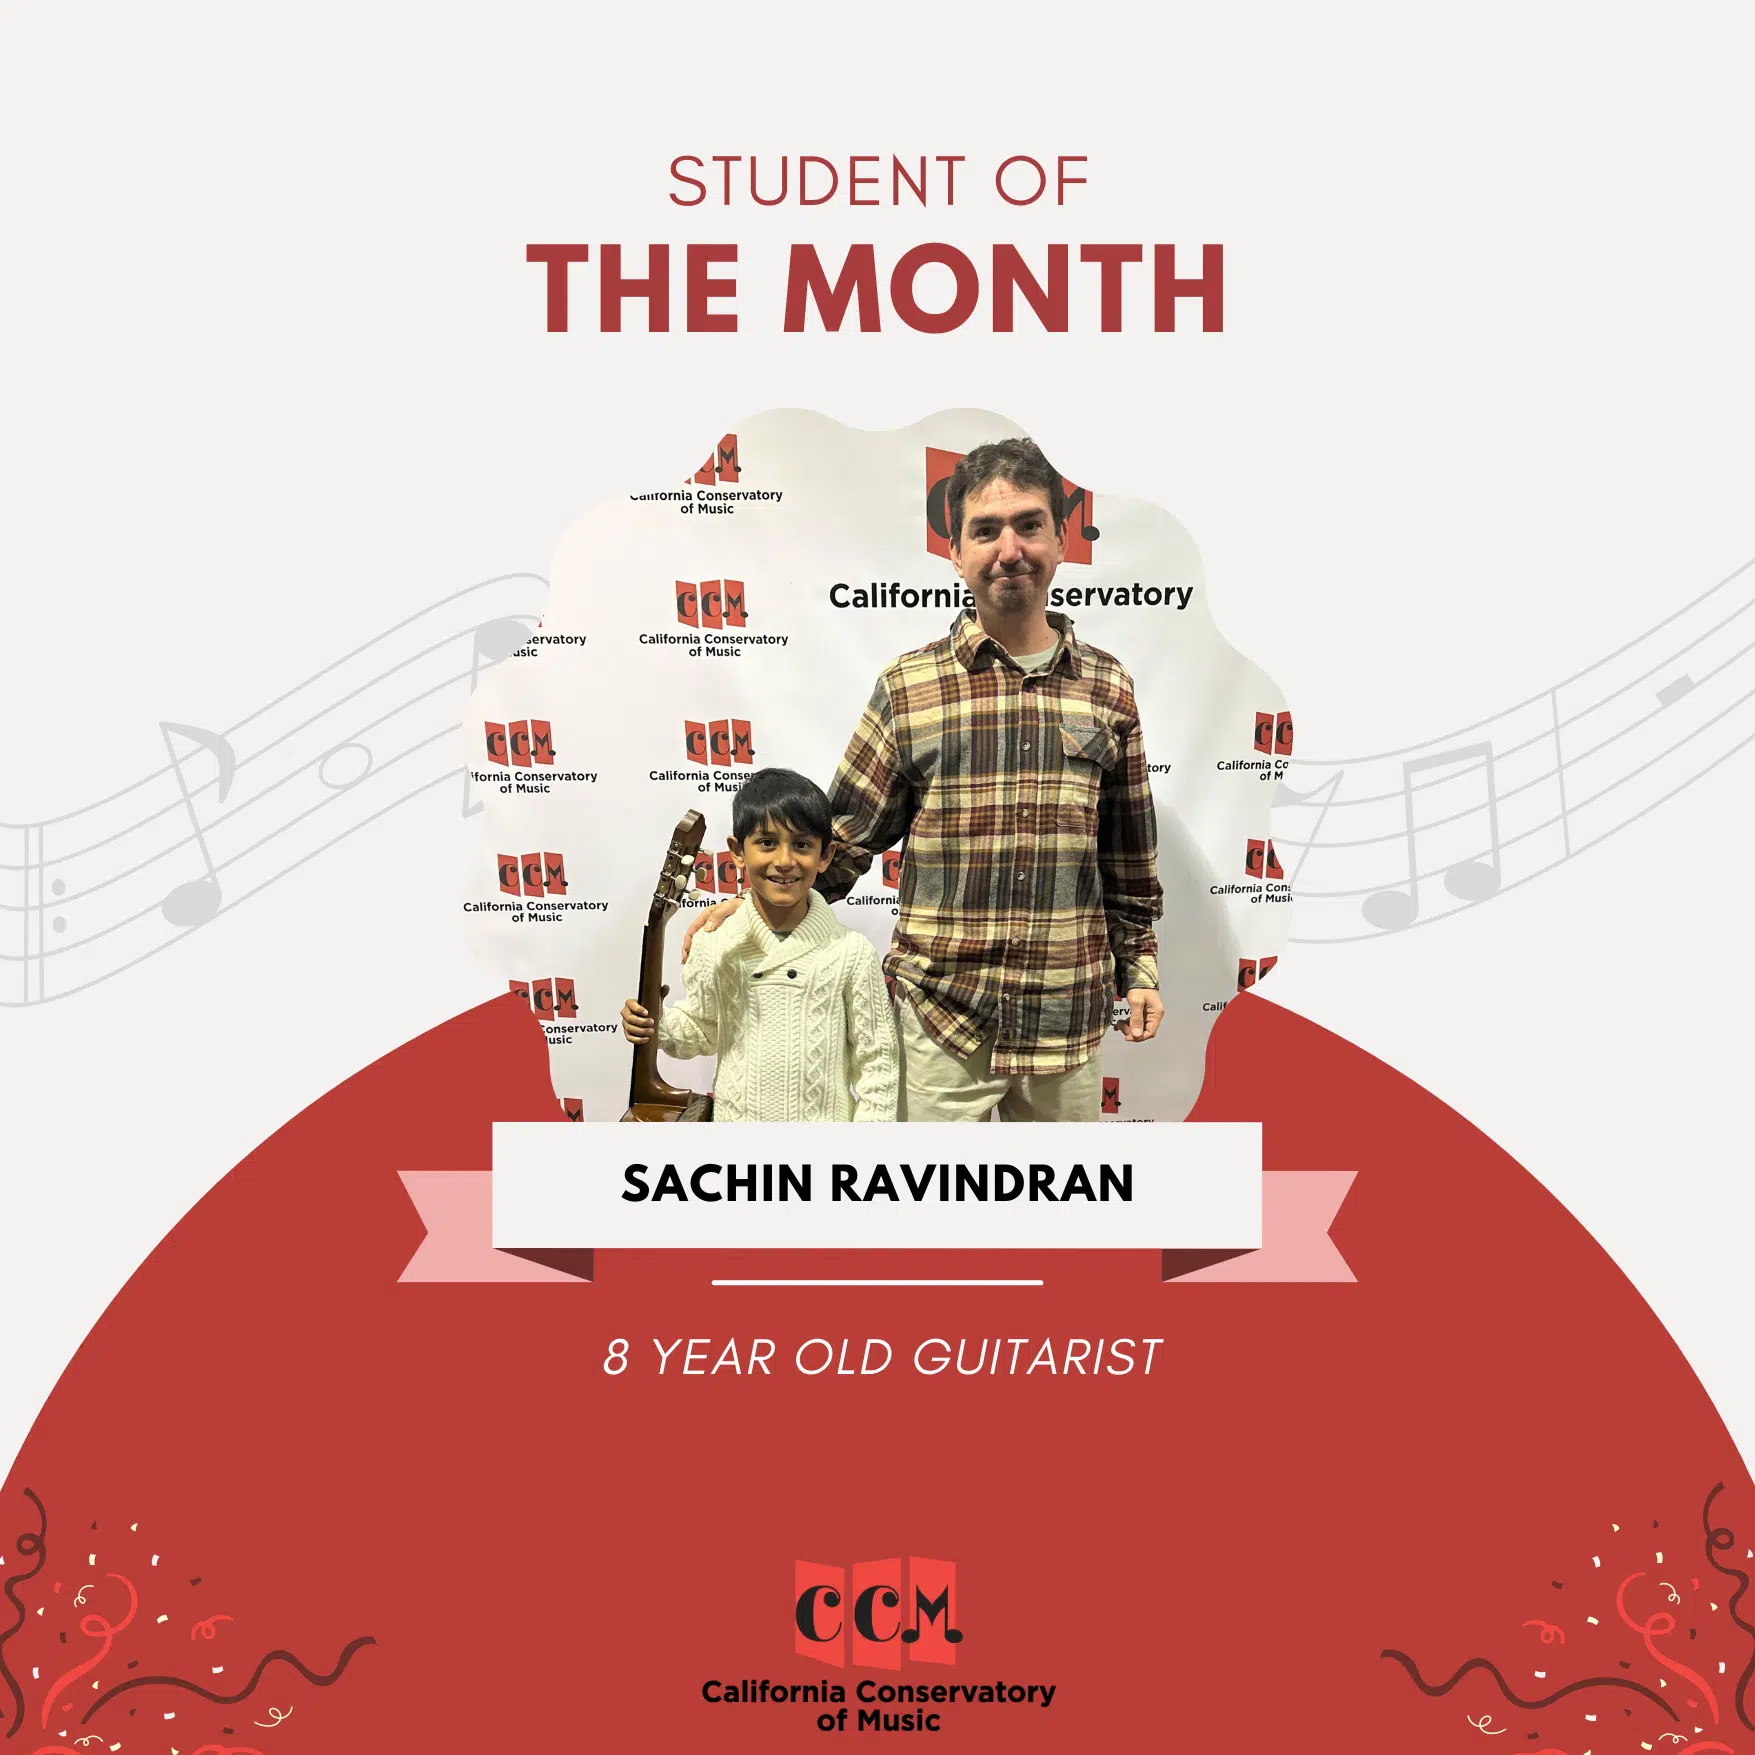 Sachin Ravindran, the February Student of the Month